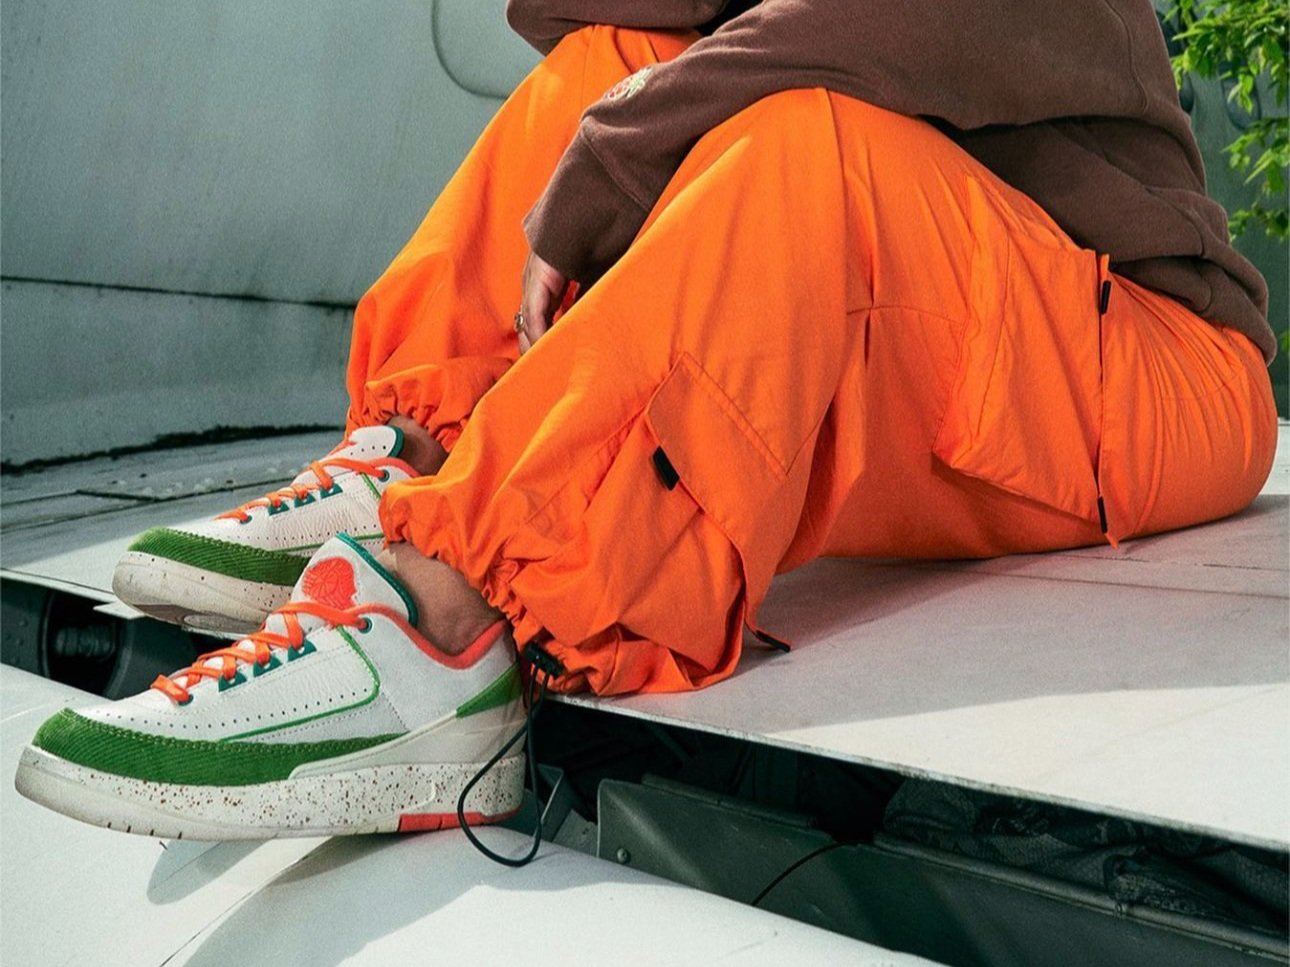 Detecting Chic: Virgil Abloh's First Sneakers for Louis Vuitton